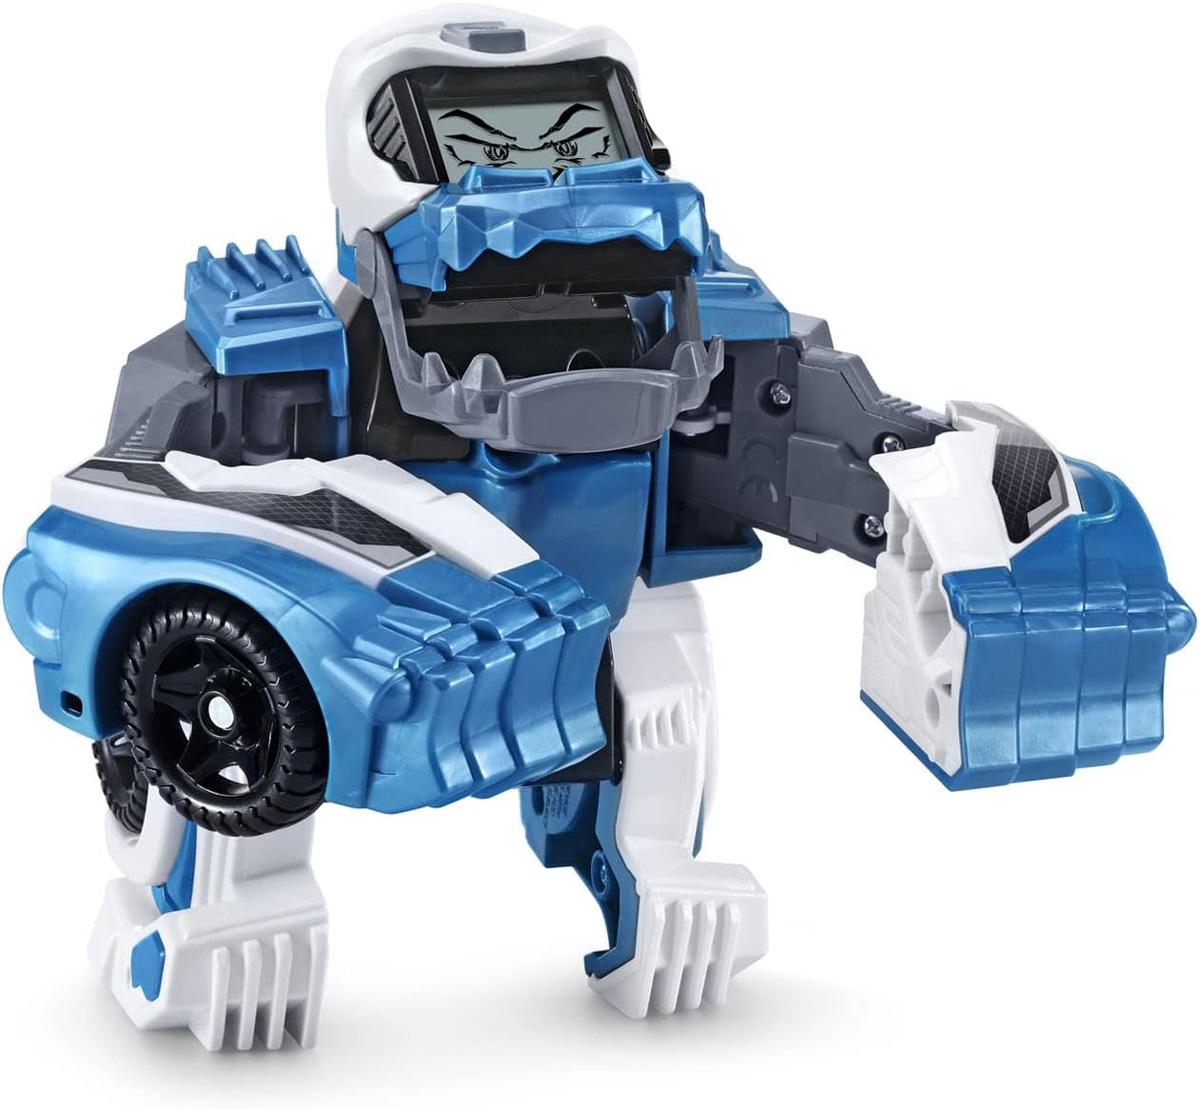 VTech Switch and Go Gorilla Muscle Car for $5.59